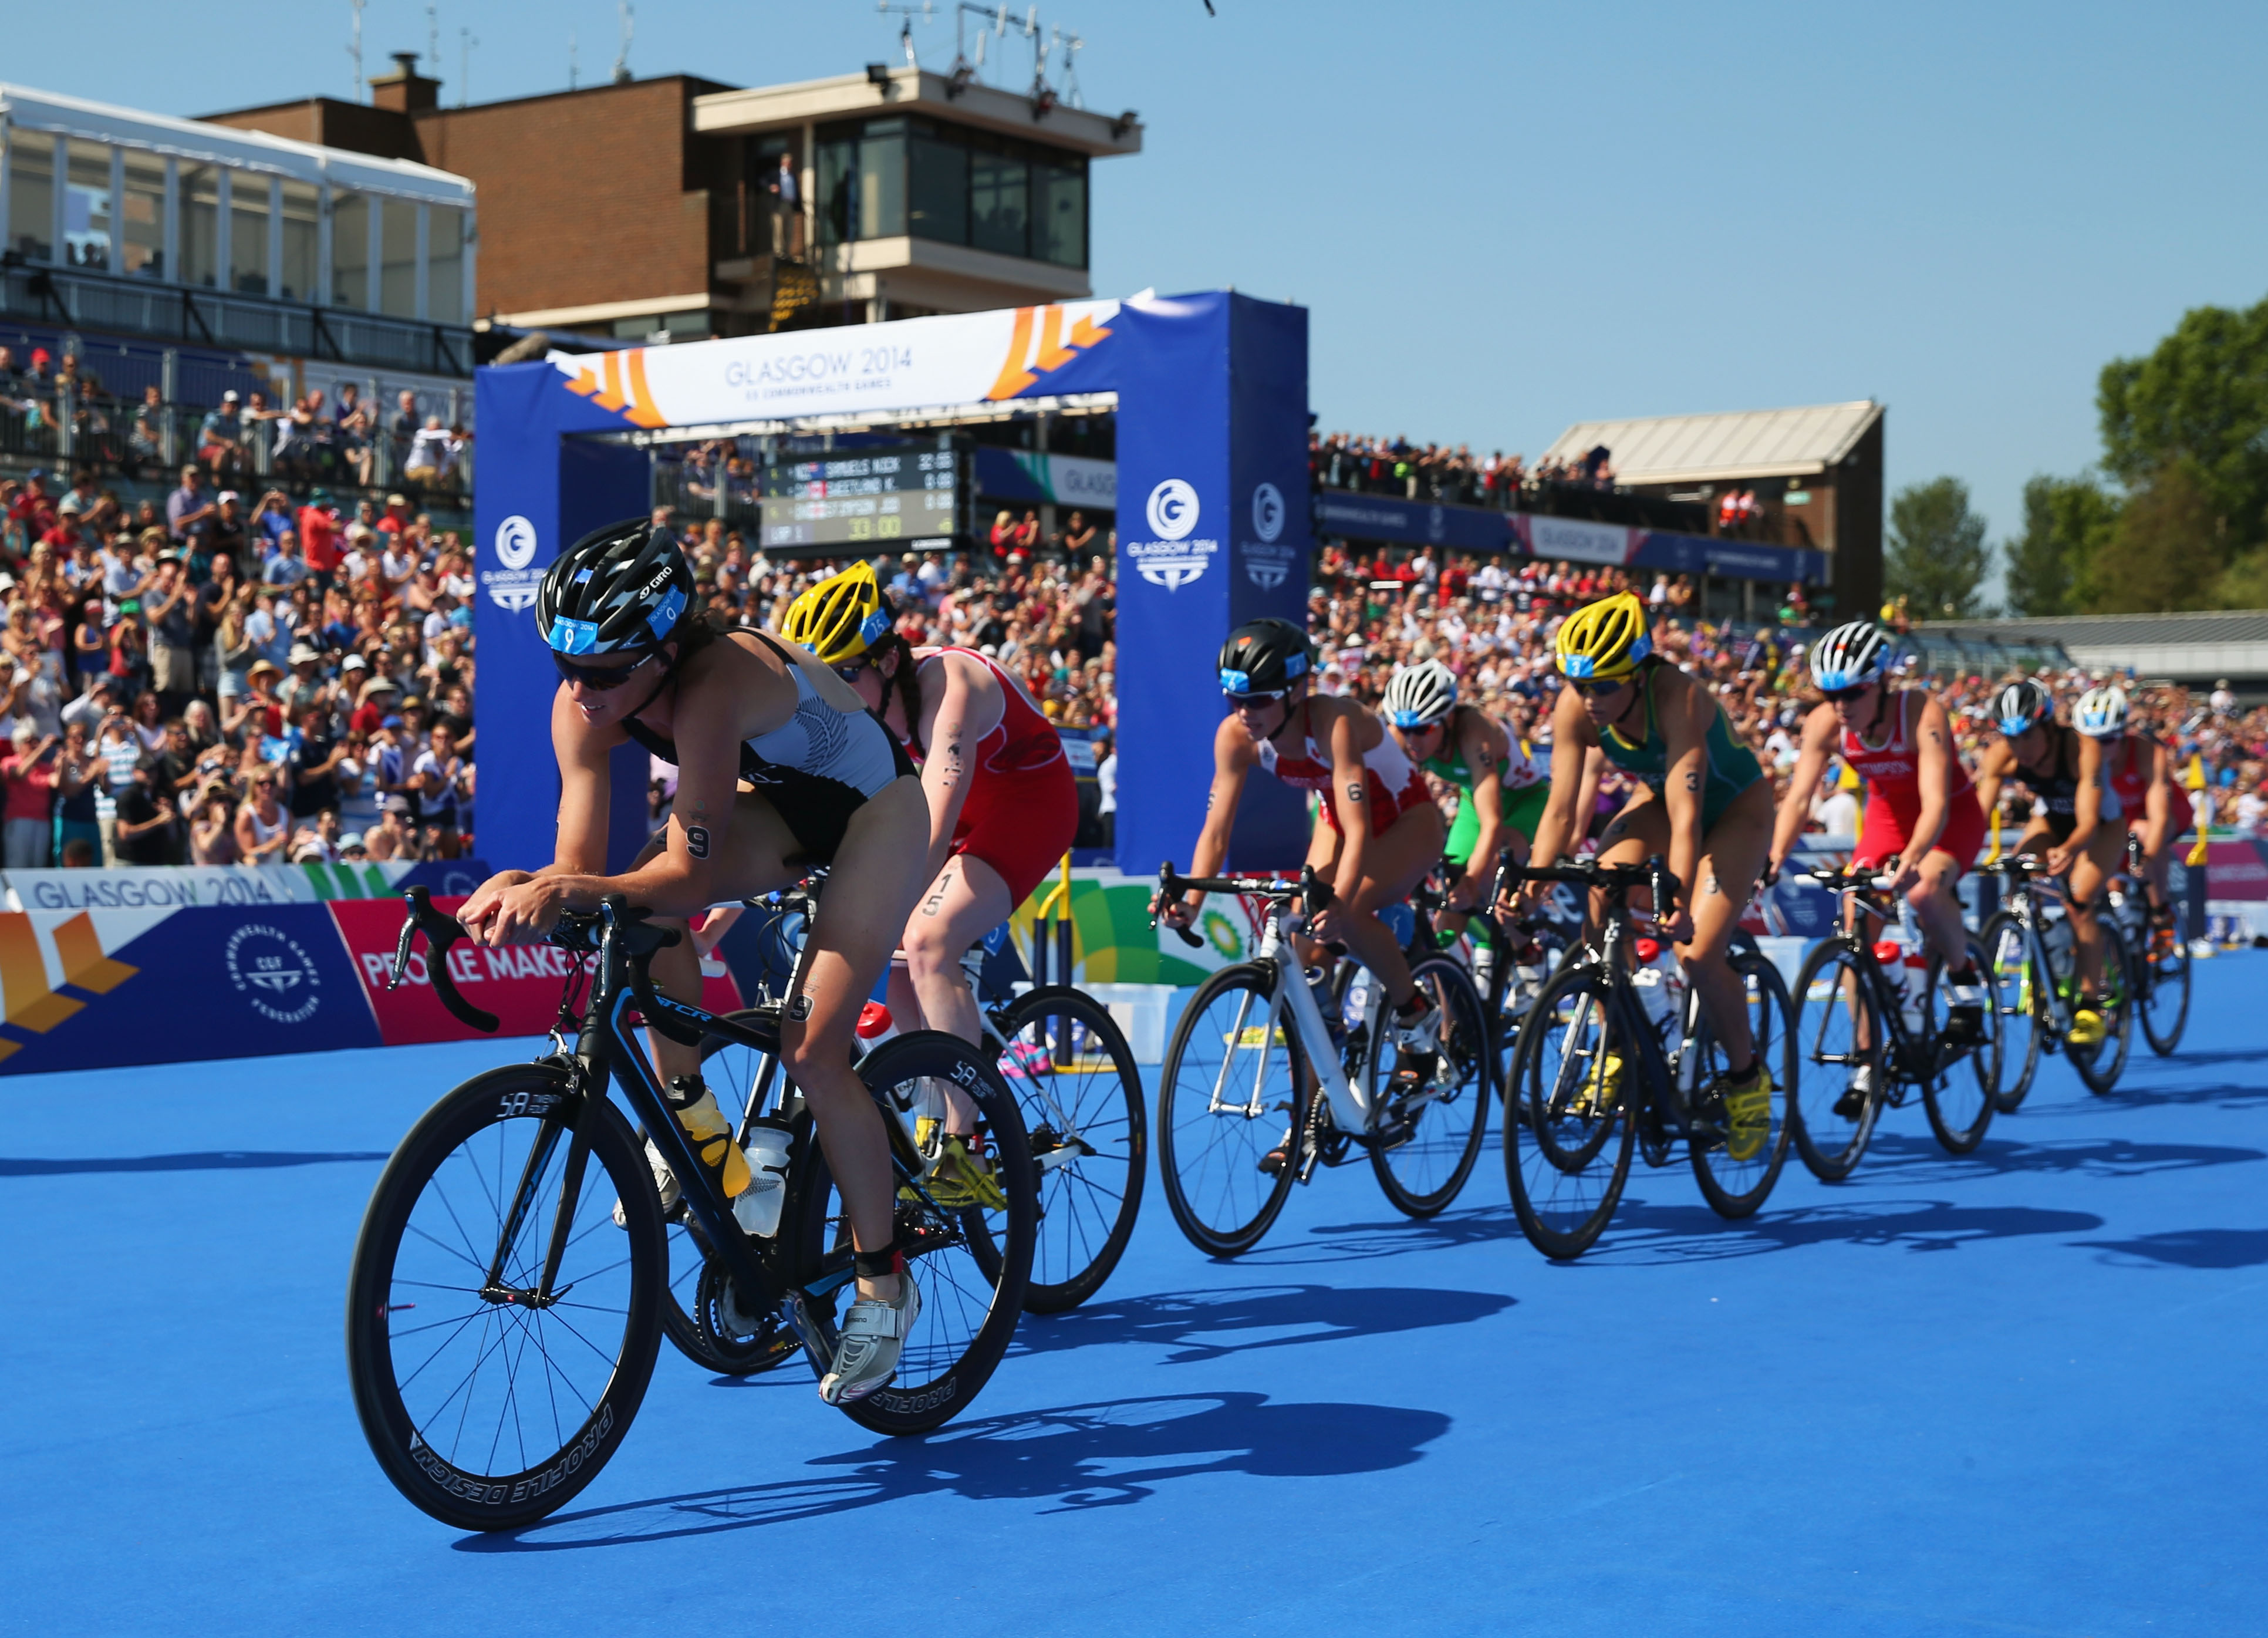 FOUR NAMED TO CONTEST MIXED TEAM RELAY TRIATHLON New Zealand Olympic Team